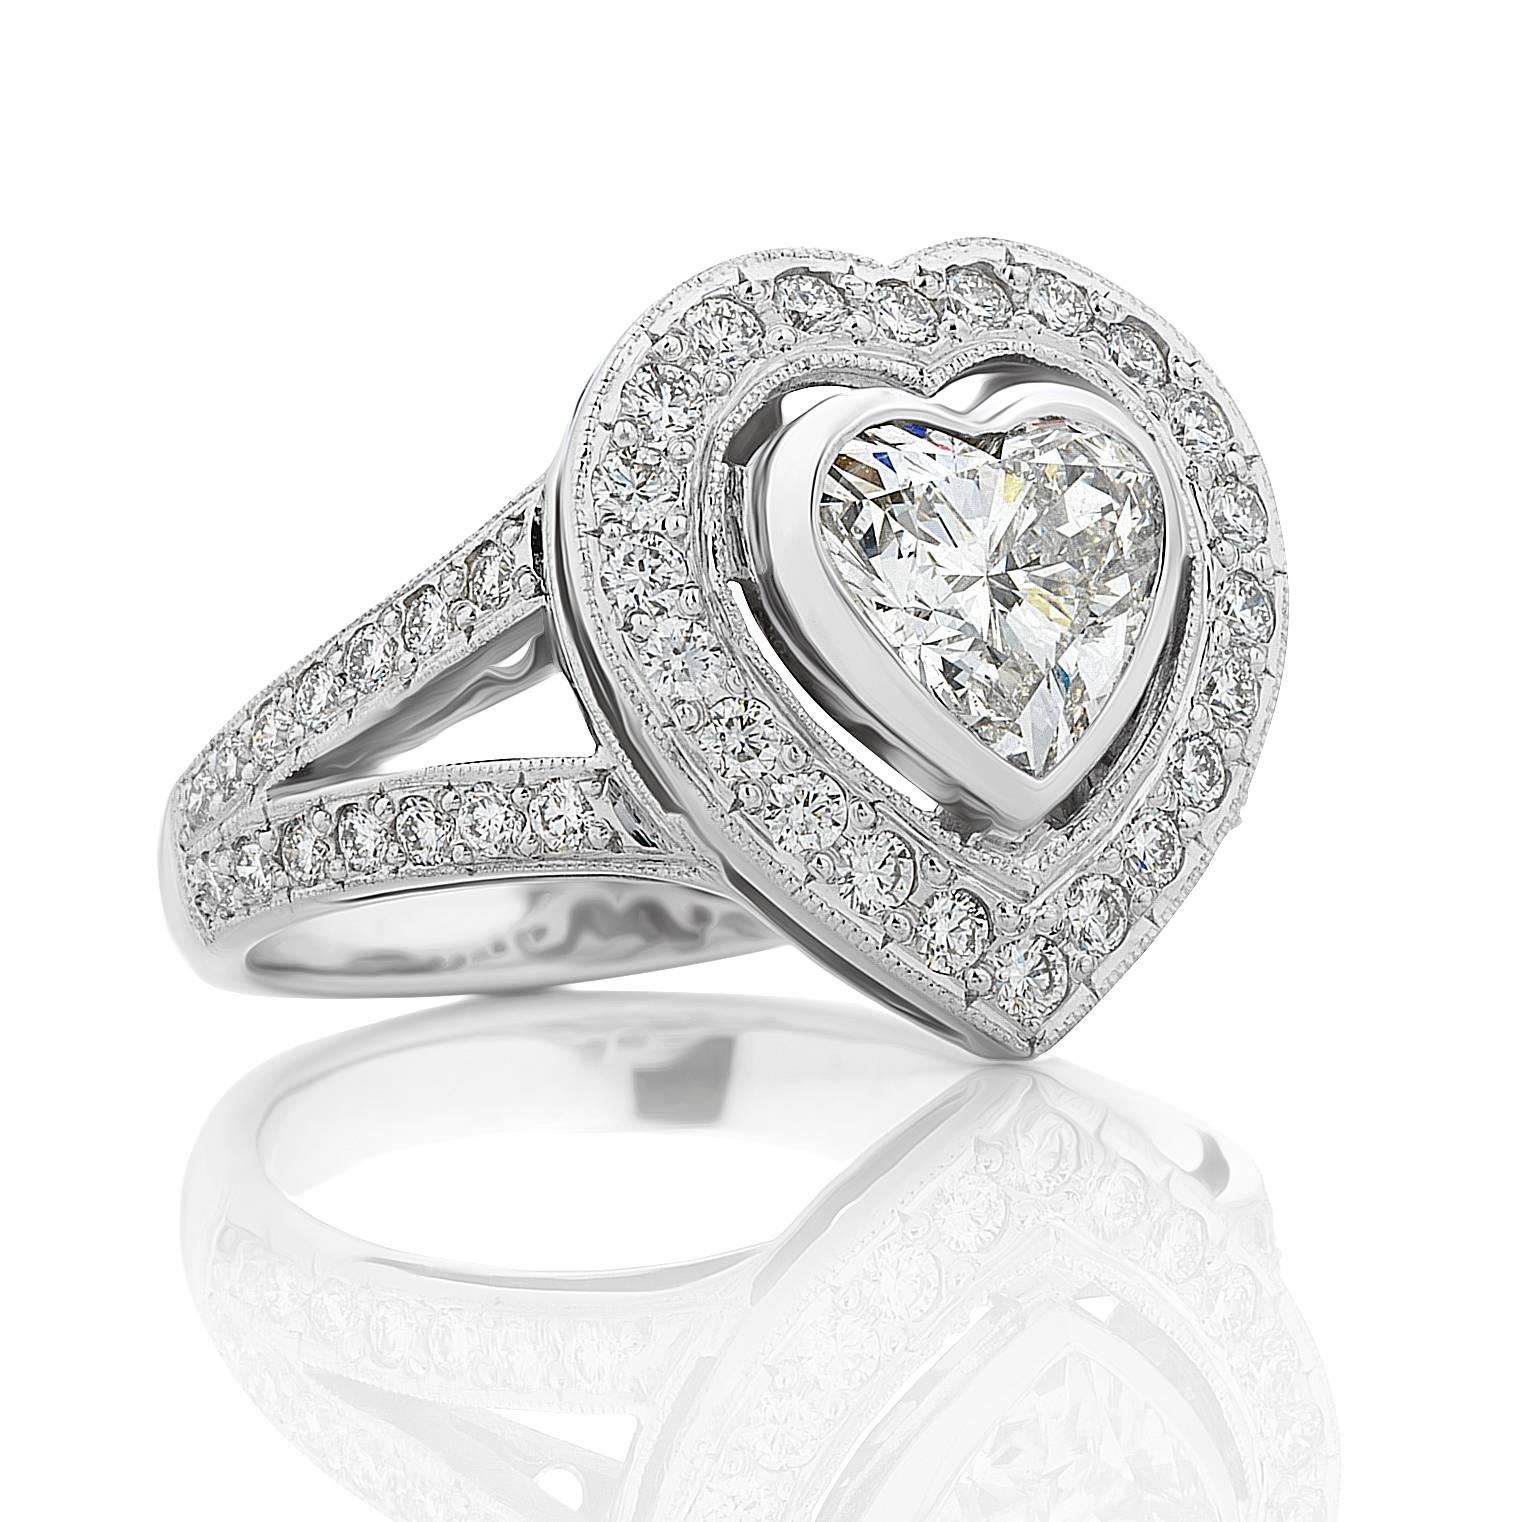 Handmade 18 karat white gold diamond Halo style ring.  Centred with one bezel set 1.14ct heart shaped diamond - GIA report stating G colour Si1 clarity.  Beautifully proportioned. Surrounded with grain set brilliant cut diamond and a V shaped split